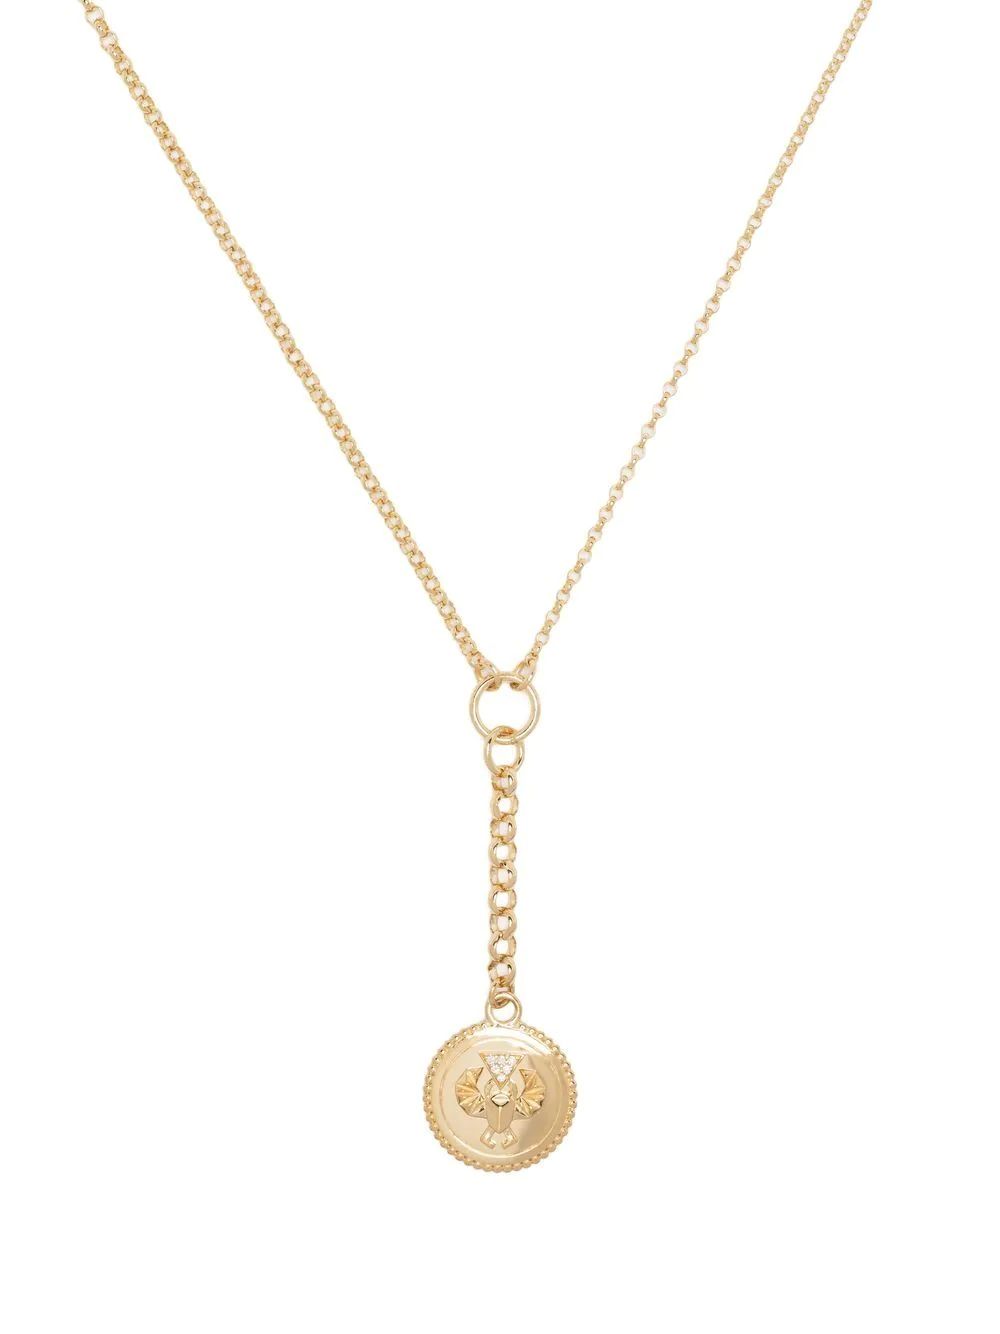 18kt yellow gold pendant necklace | Farfetch Global